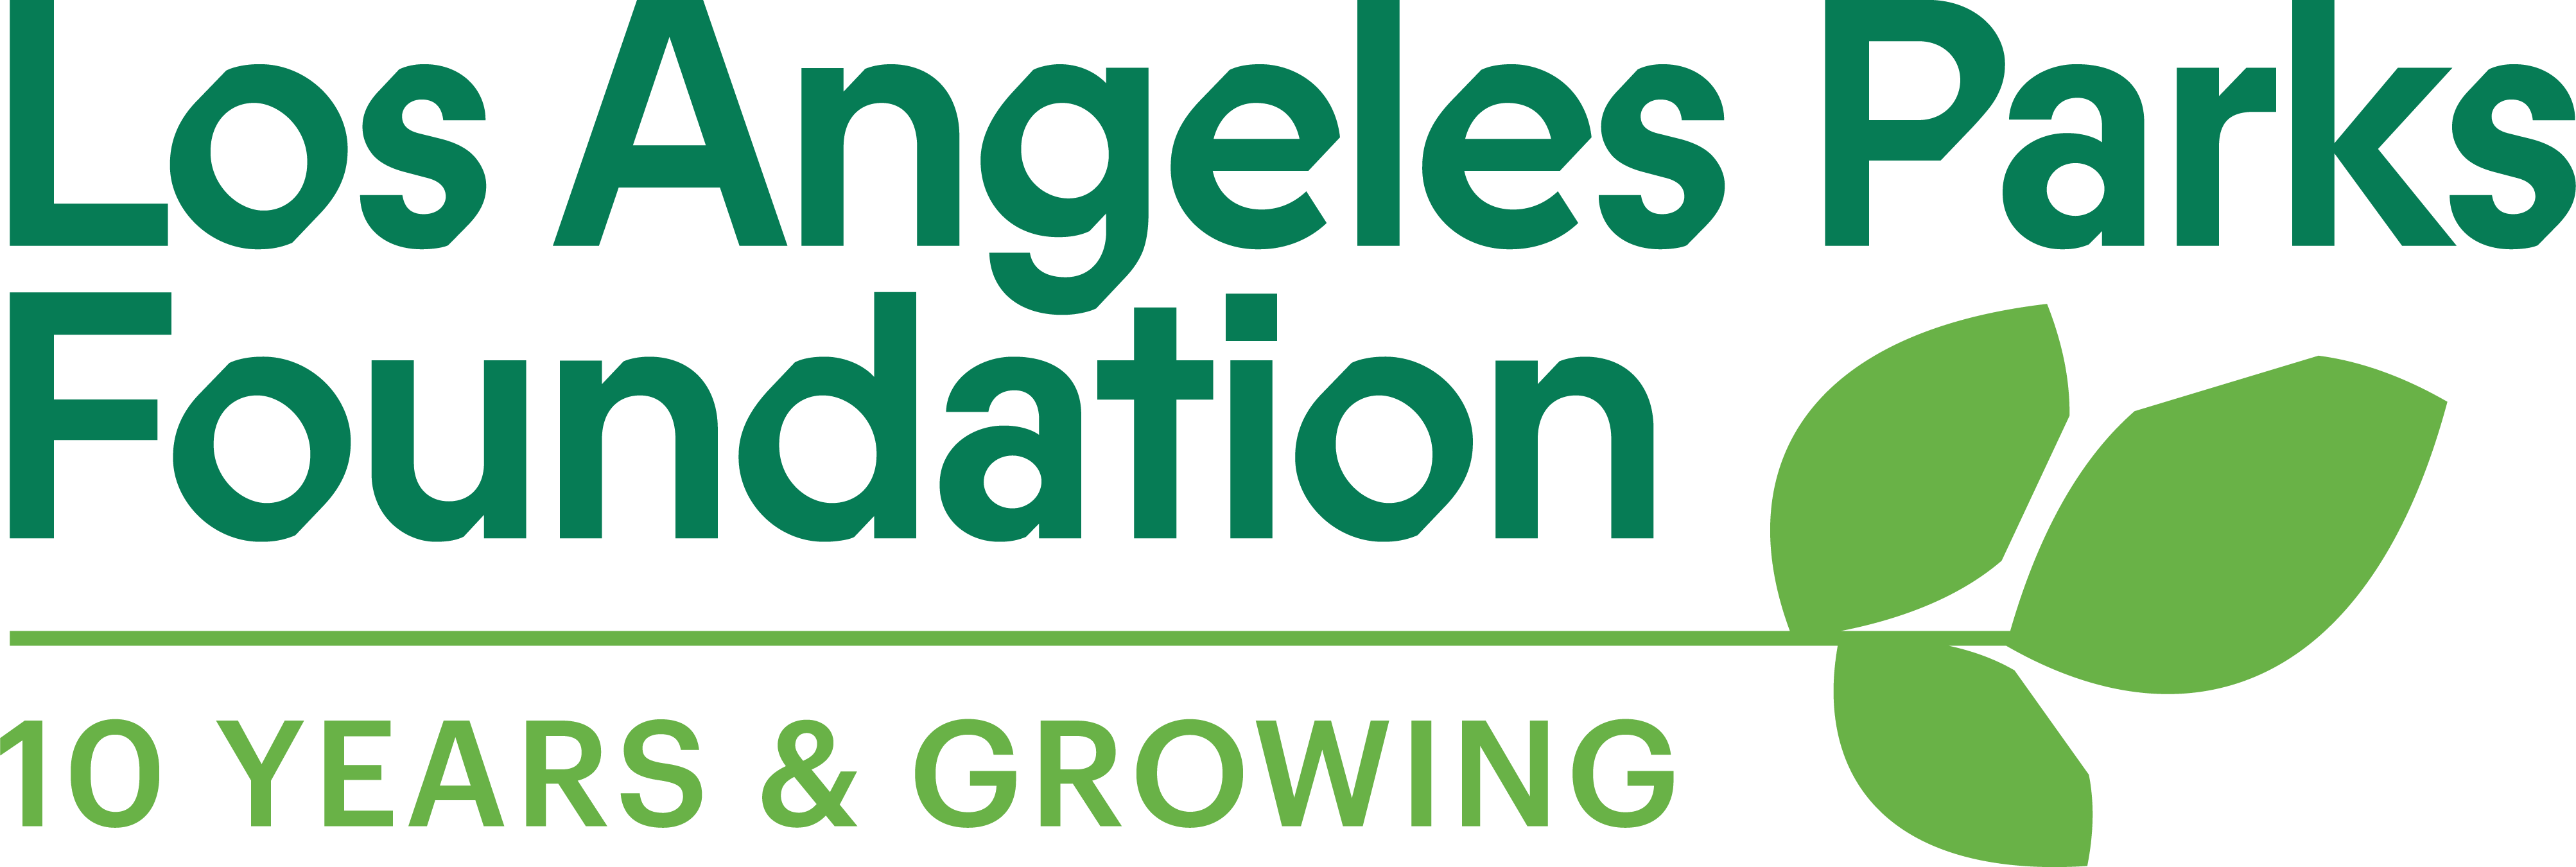 LA Parks Logo - City of Los Angeles Department of Recreation and Parks |